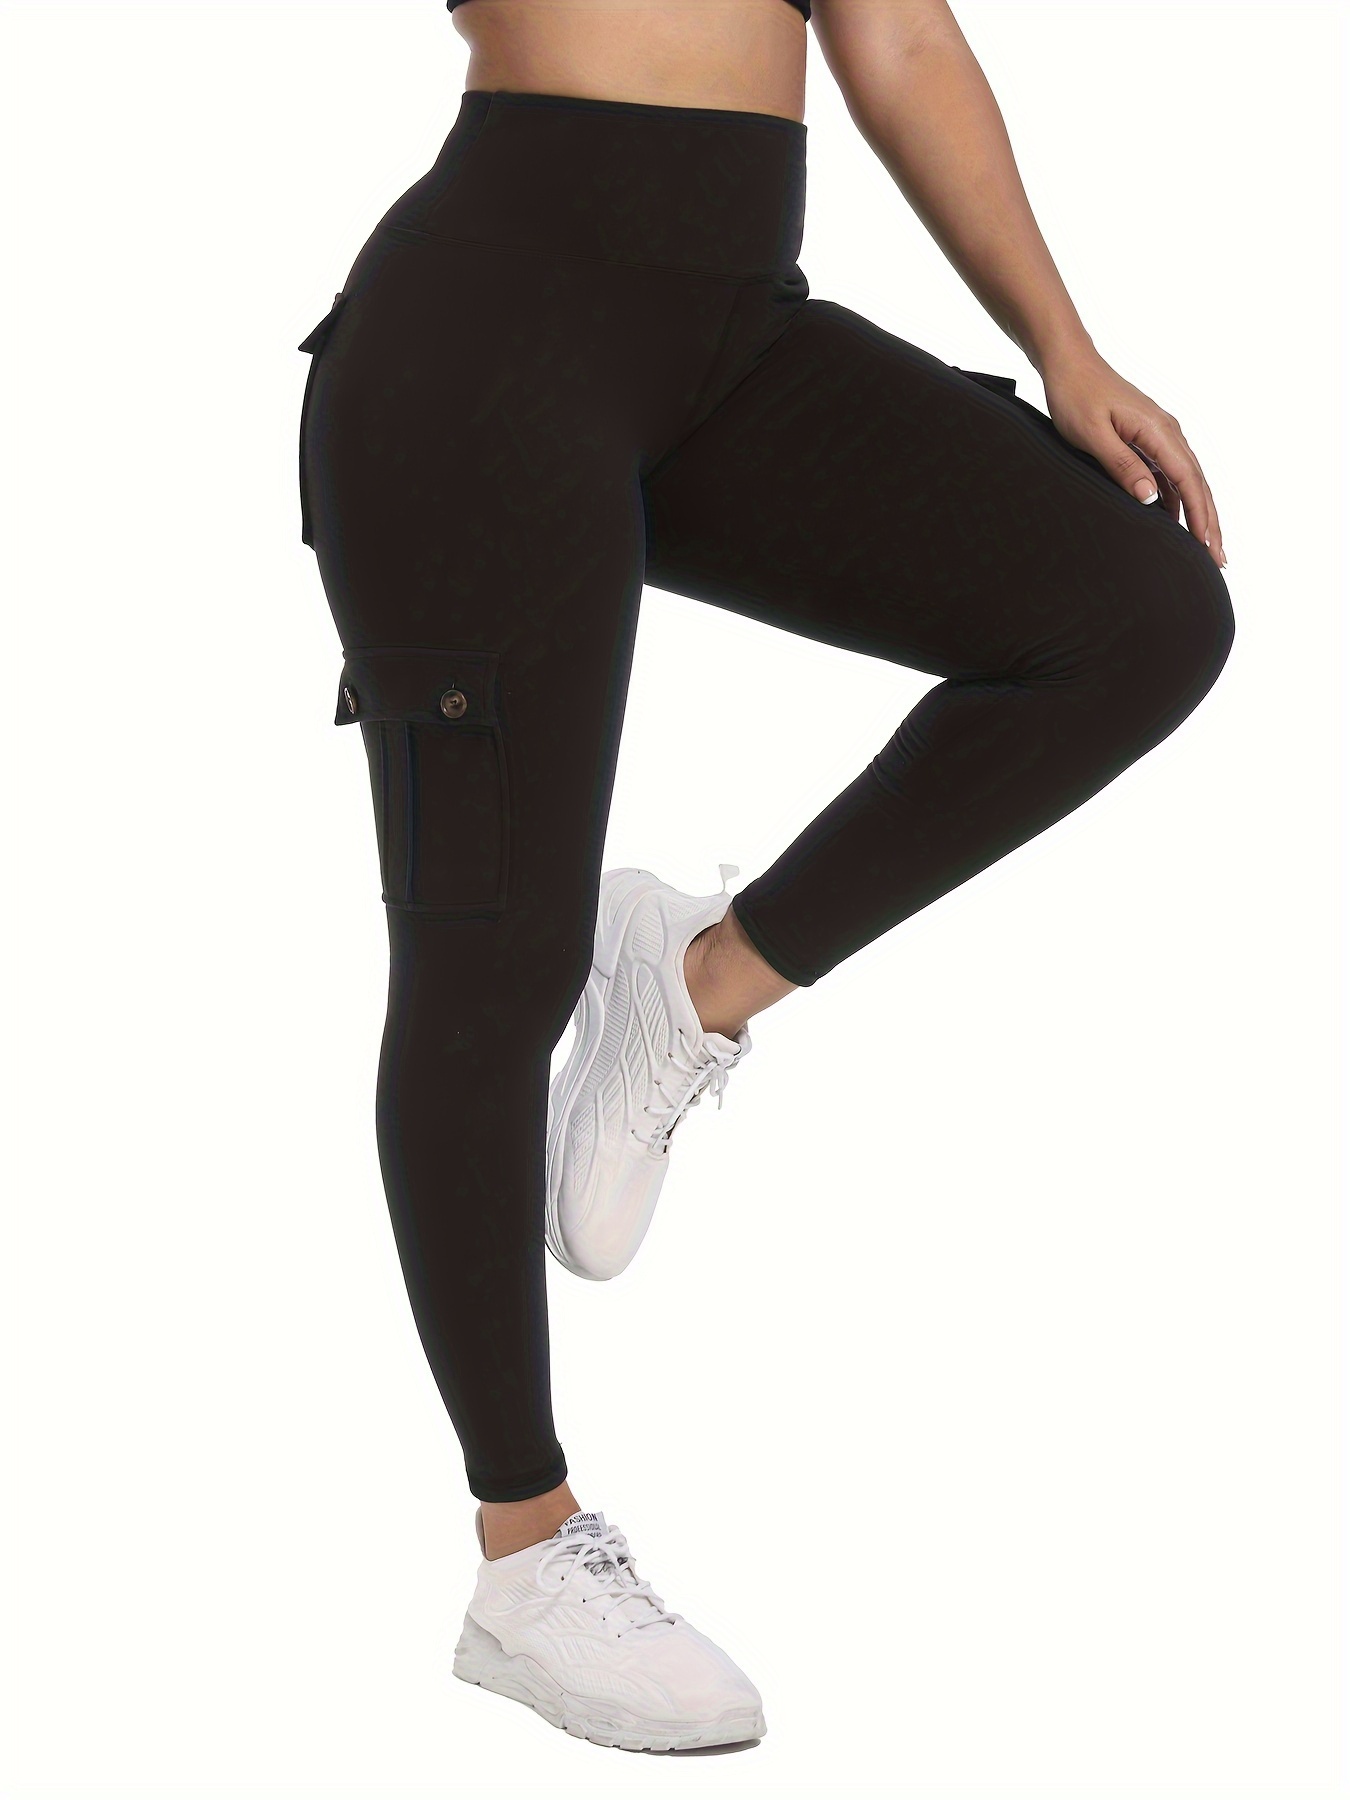 iloveSIA Leggings with Pockets for Women, Workout Capris Legging, Yoga  Pants Butt Lift High Waisted Tummy Control